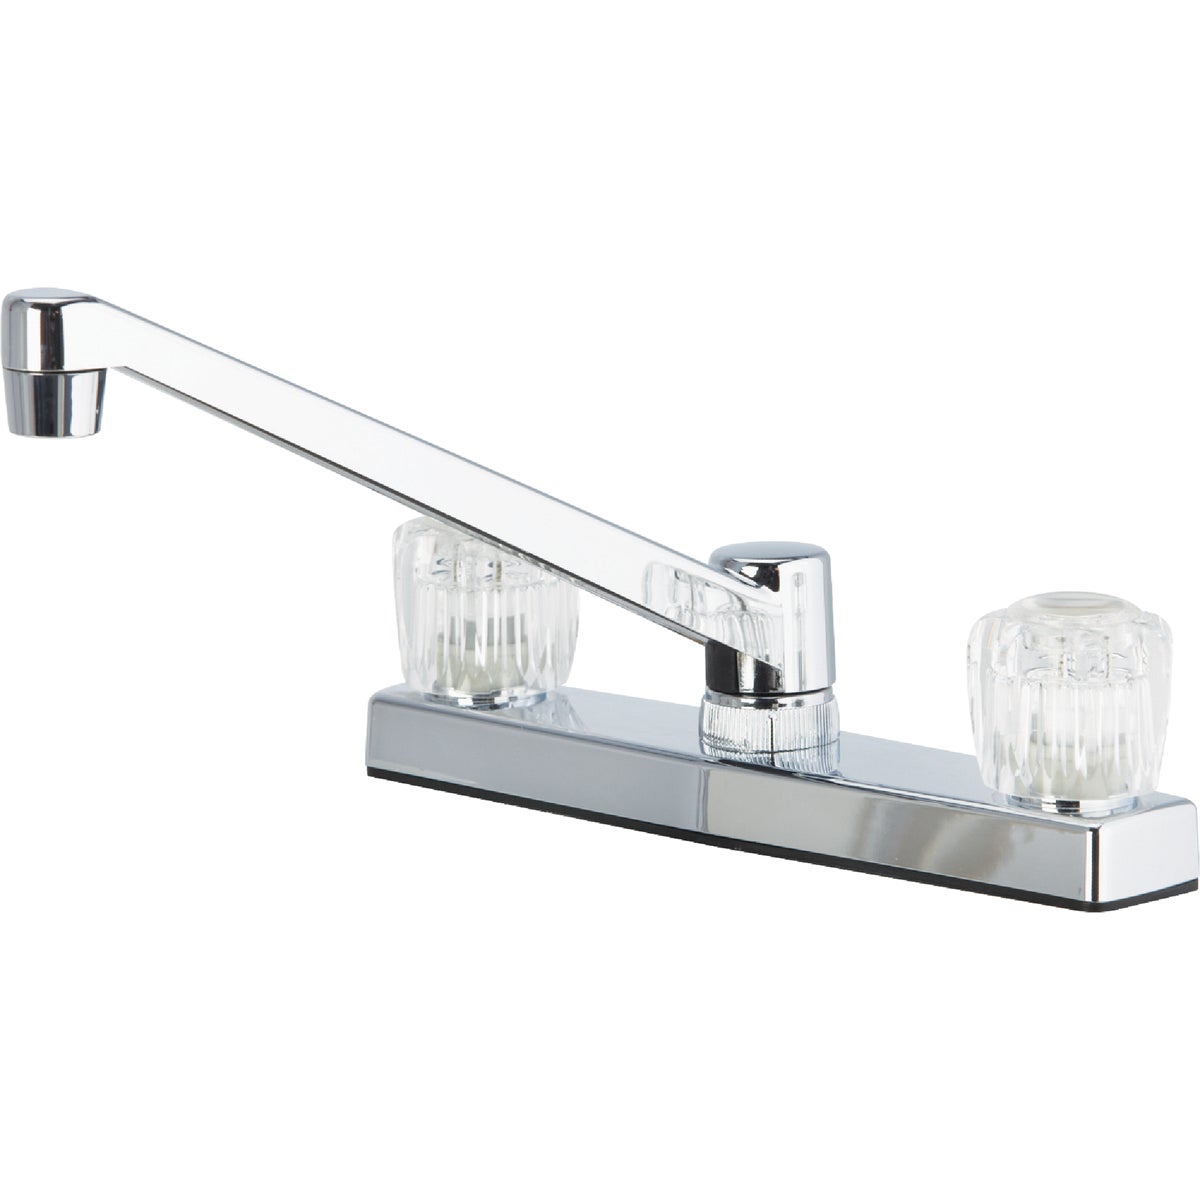 Item 400675, 2-handle nonmetallic kitchen faucet with clear acrylic knobs. 1.